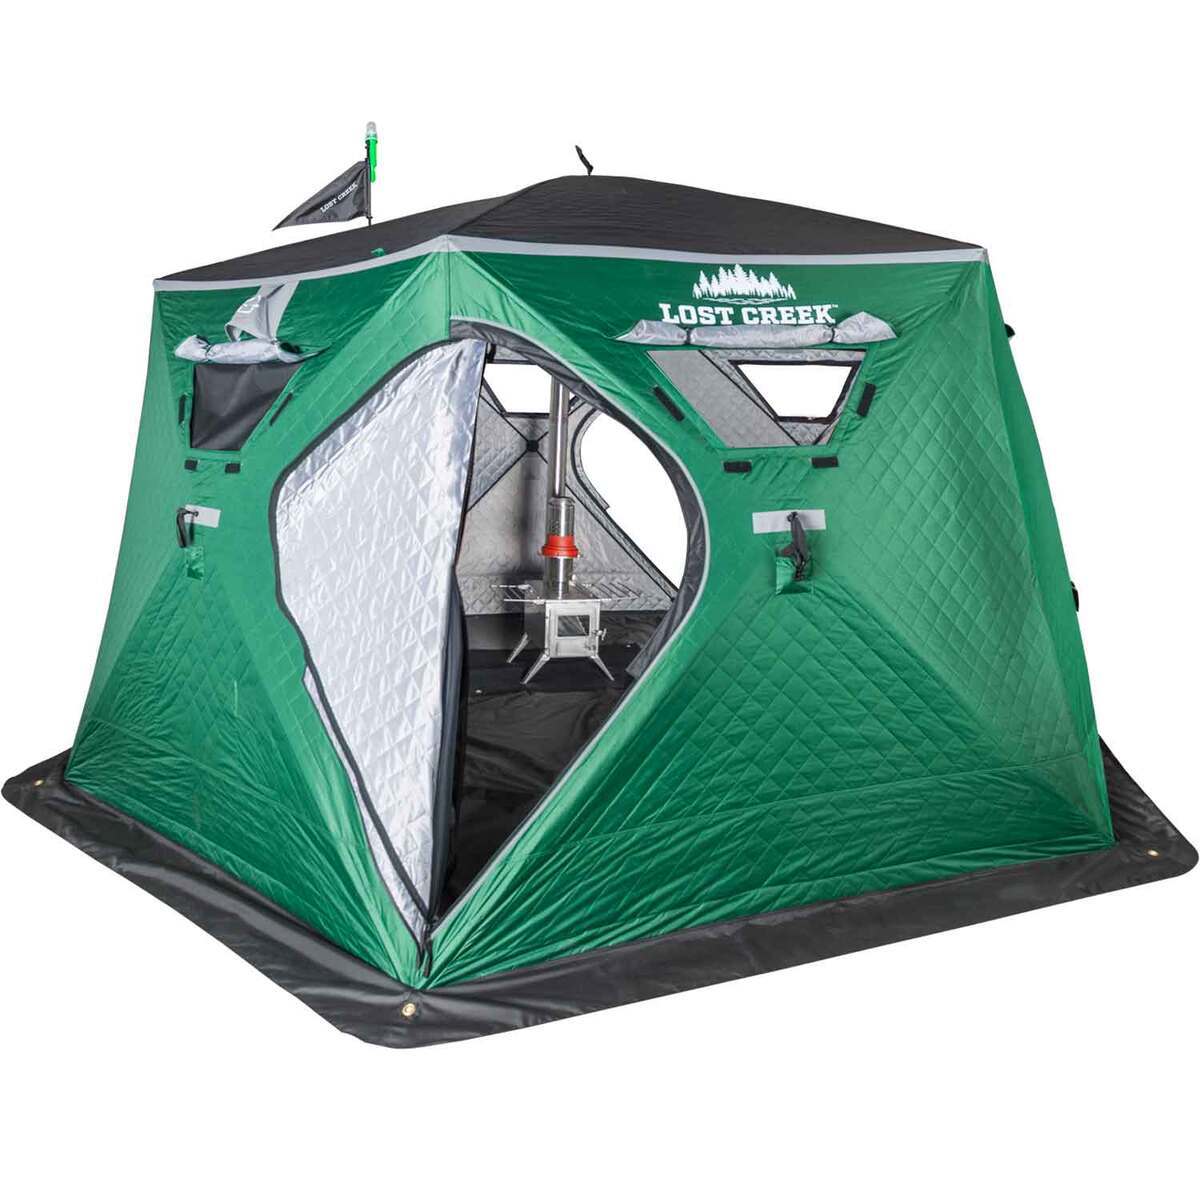 Lost Creek 6-Person Multifunctional Ice Fishing Shelter - Green/Black/Silver by Sportsman's Warehouse